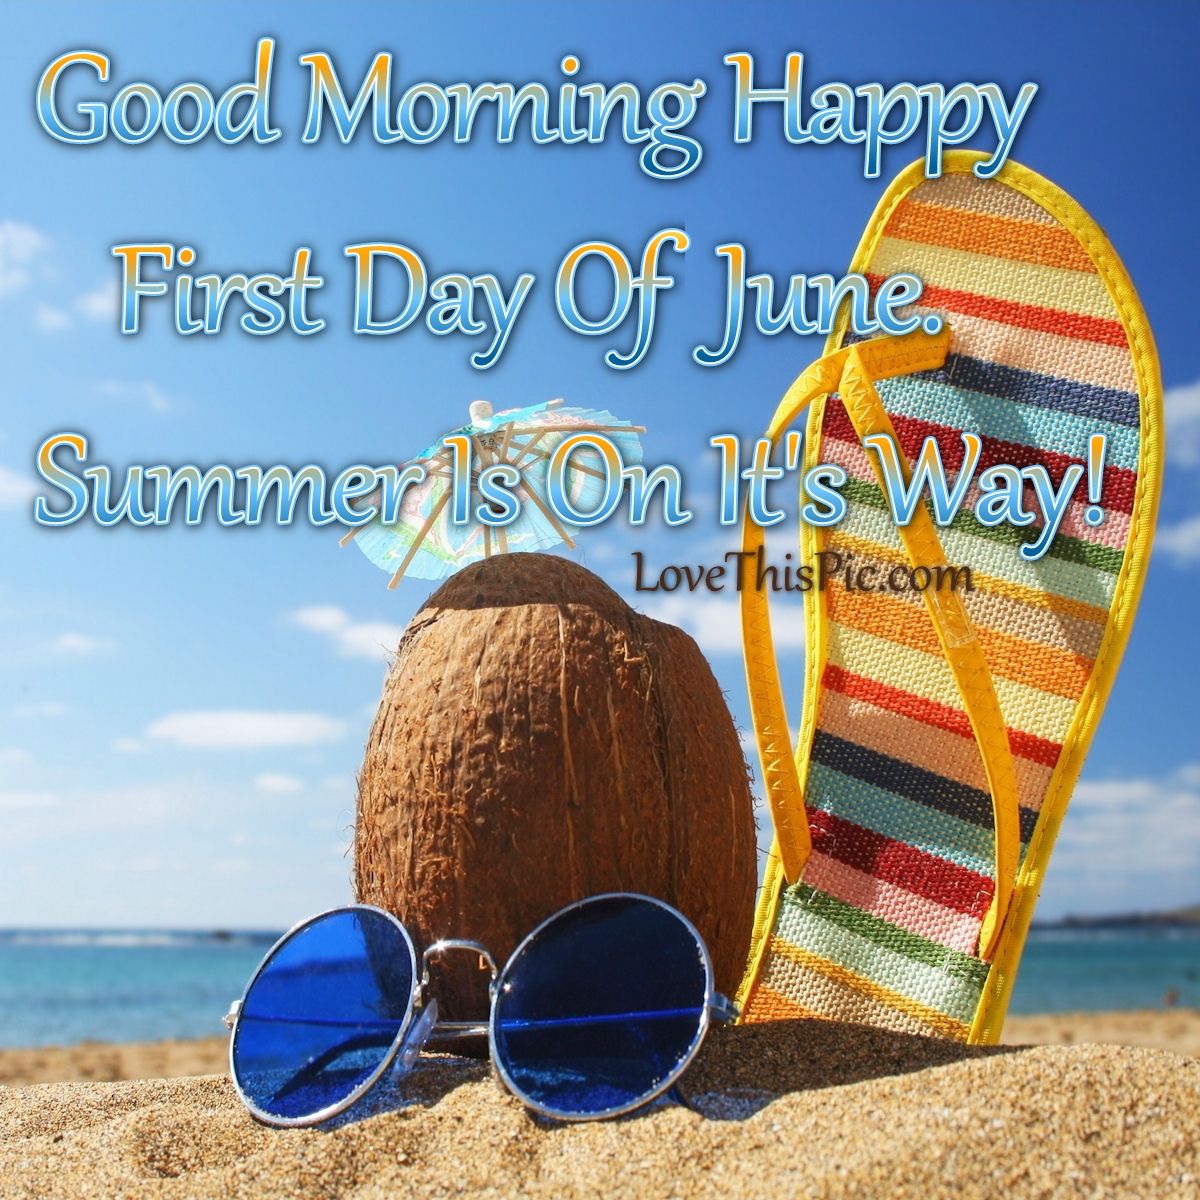 Good Morning Happy First Day Of June - Happy First Day Of June - 1200x1200  Wallpaper 